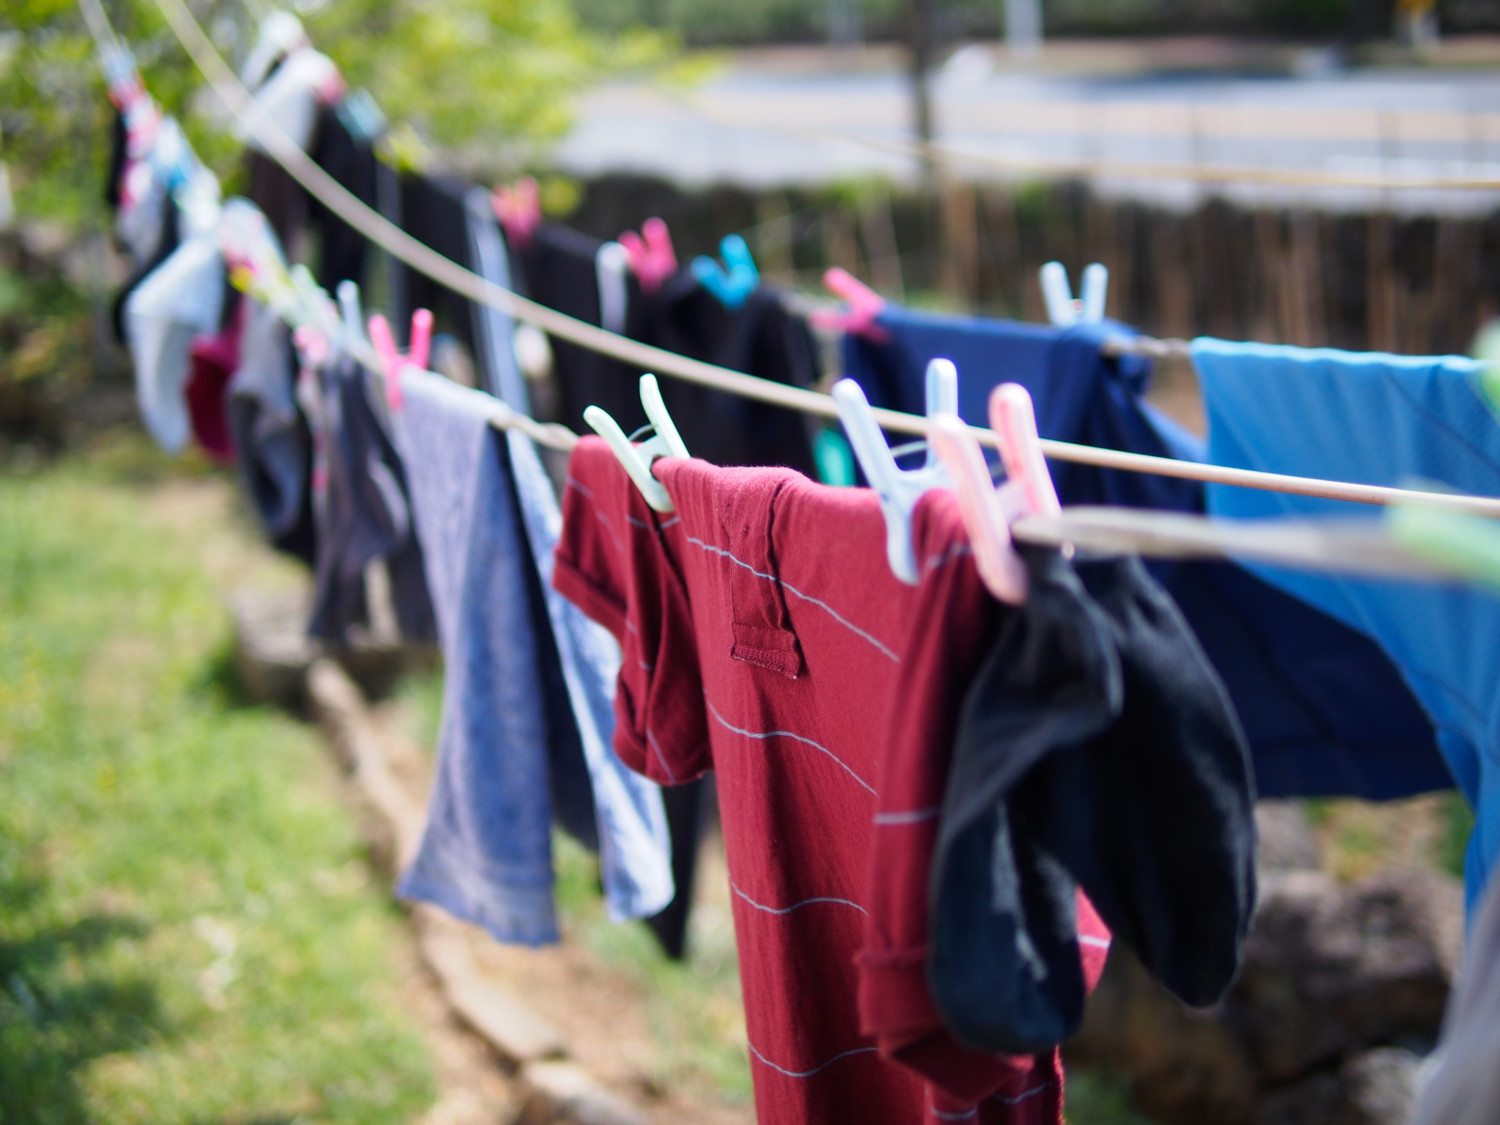 Why Does My Clean Laundry Smell Bad? - Simplemost